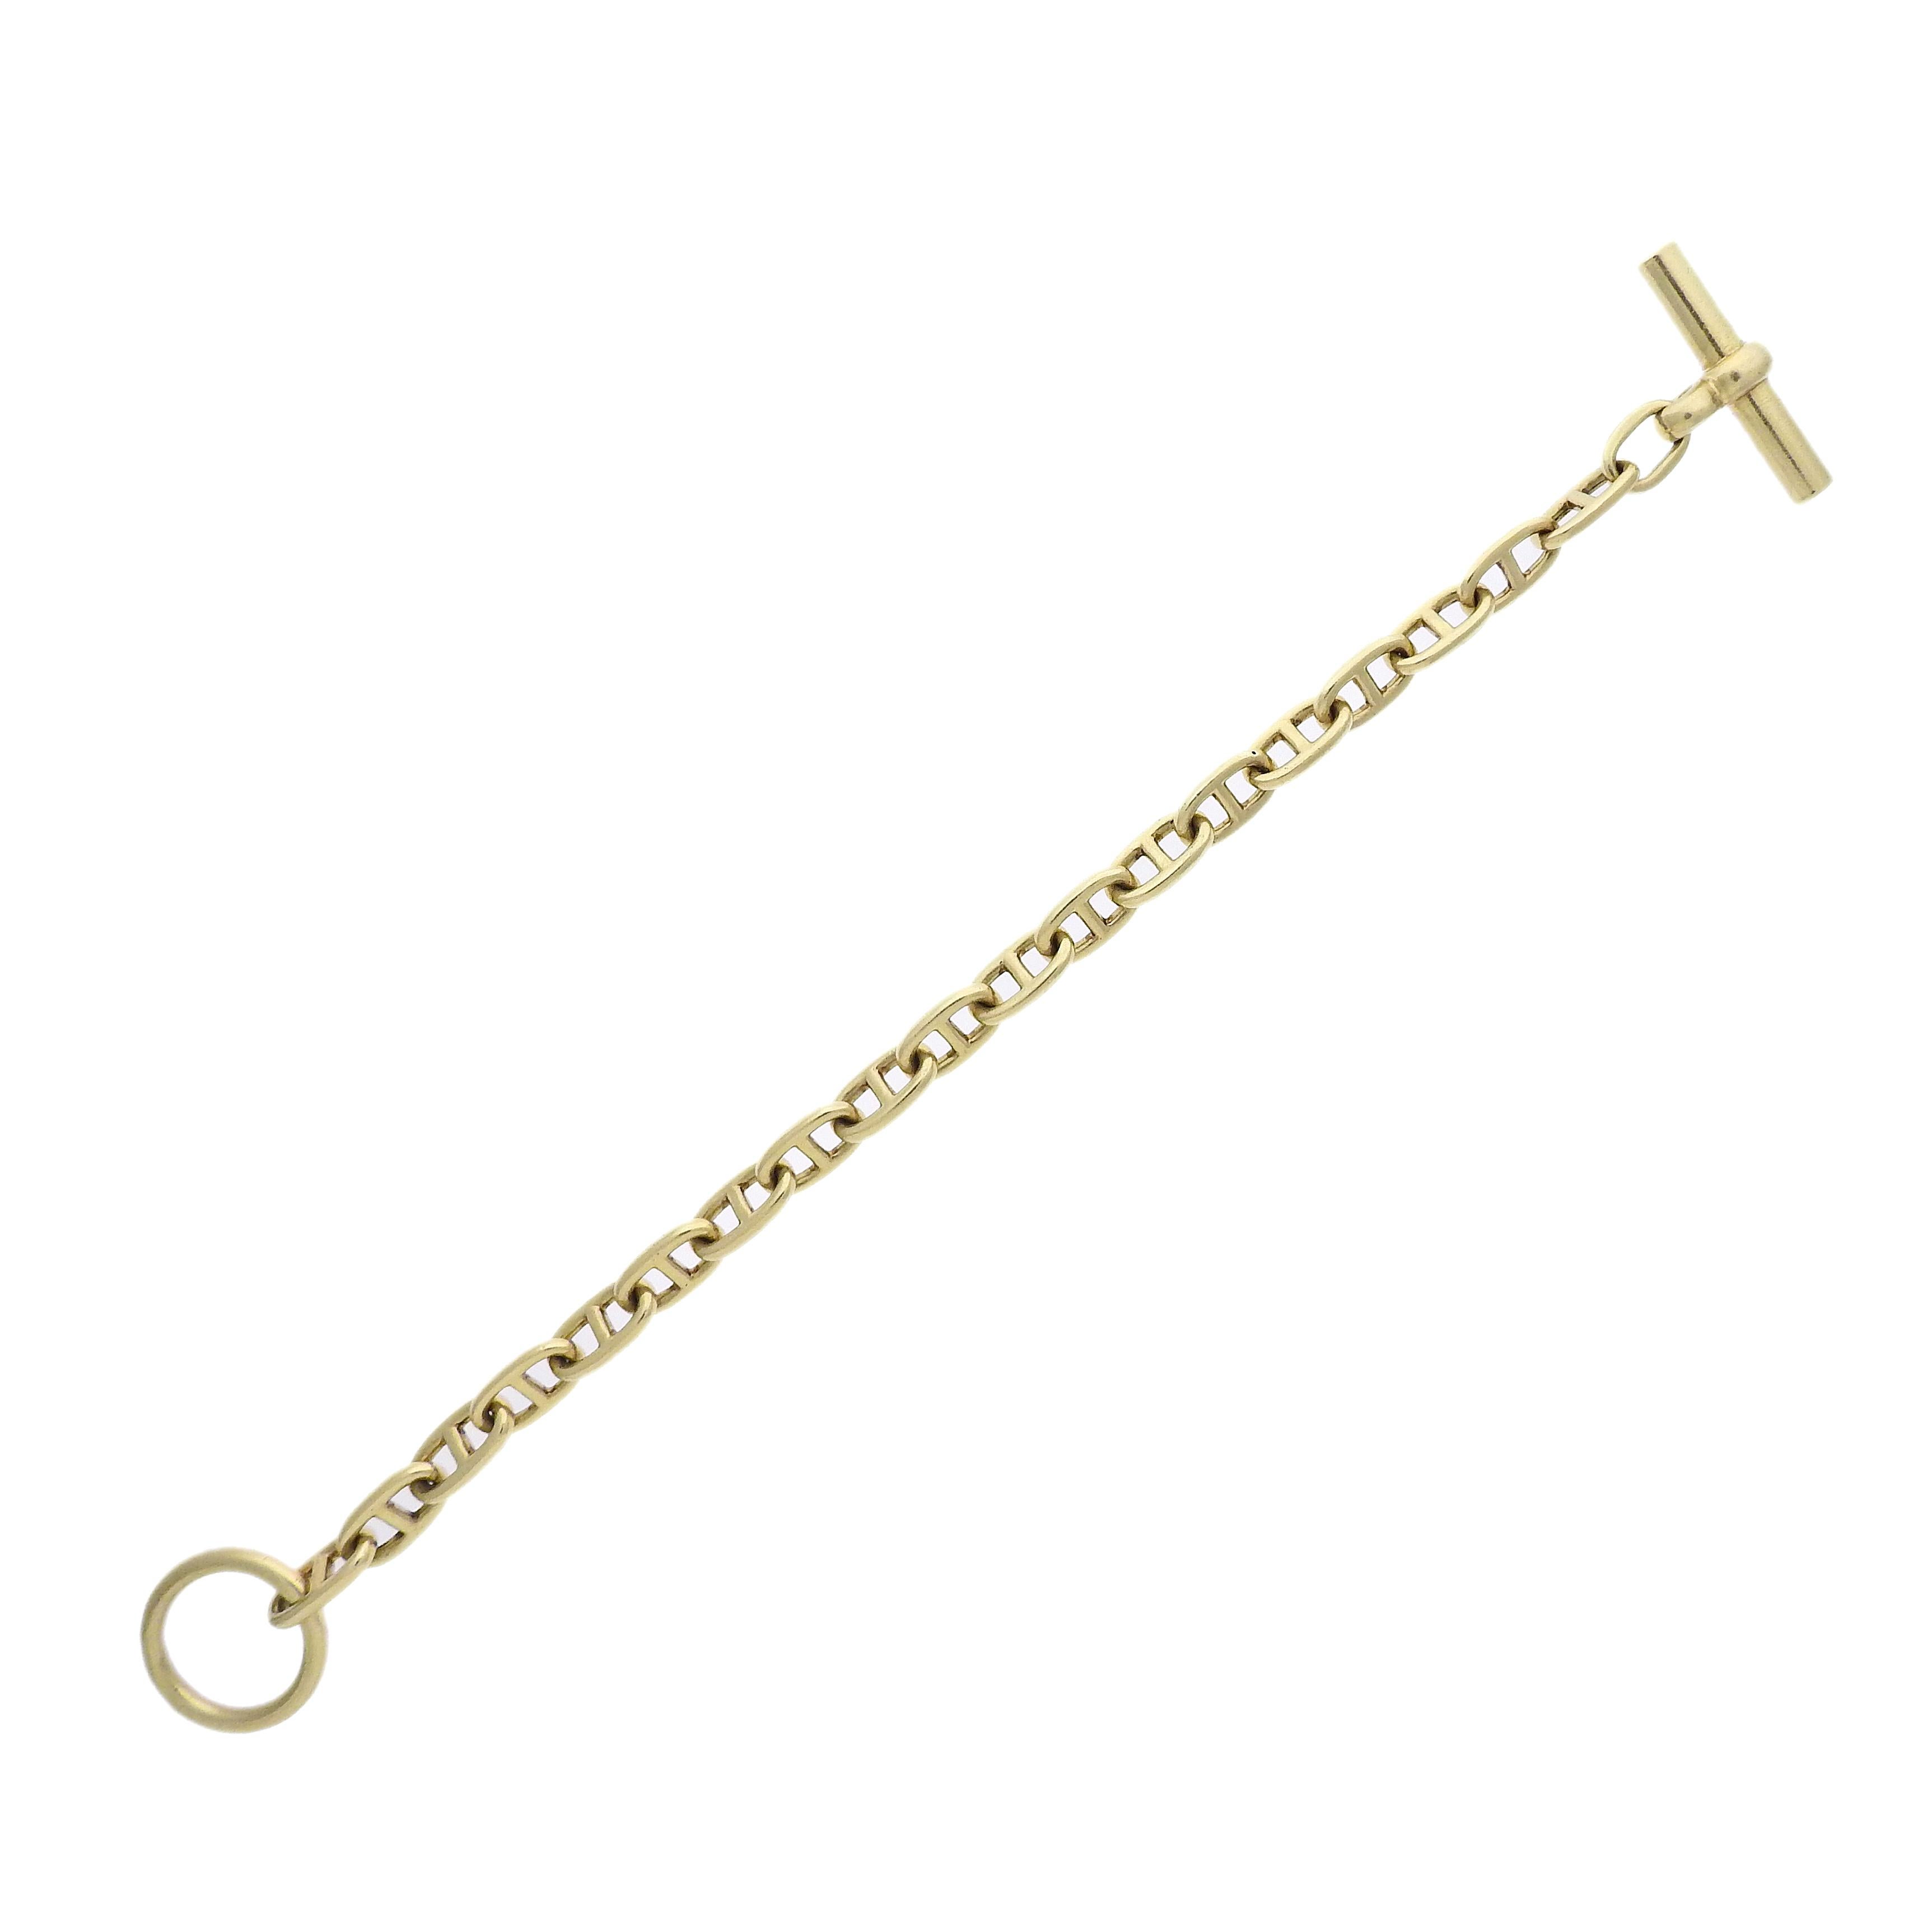 18k yellow gold bracelet crafted by Hermes for the Chain D'Ancre collection. Bracelet measures 7 3/4